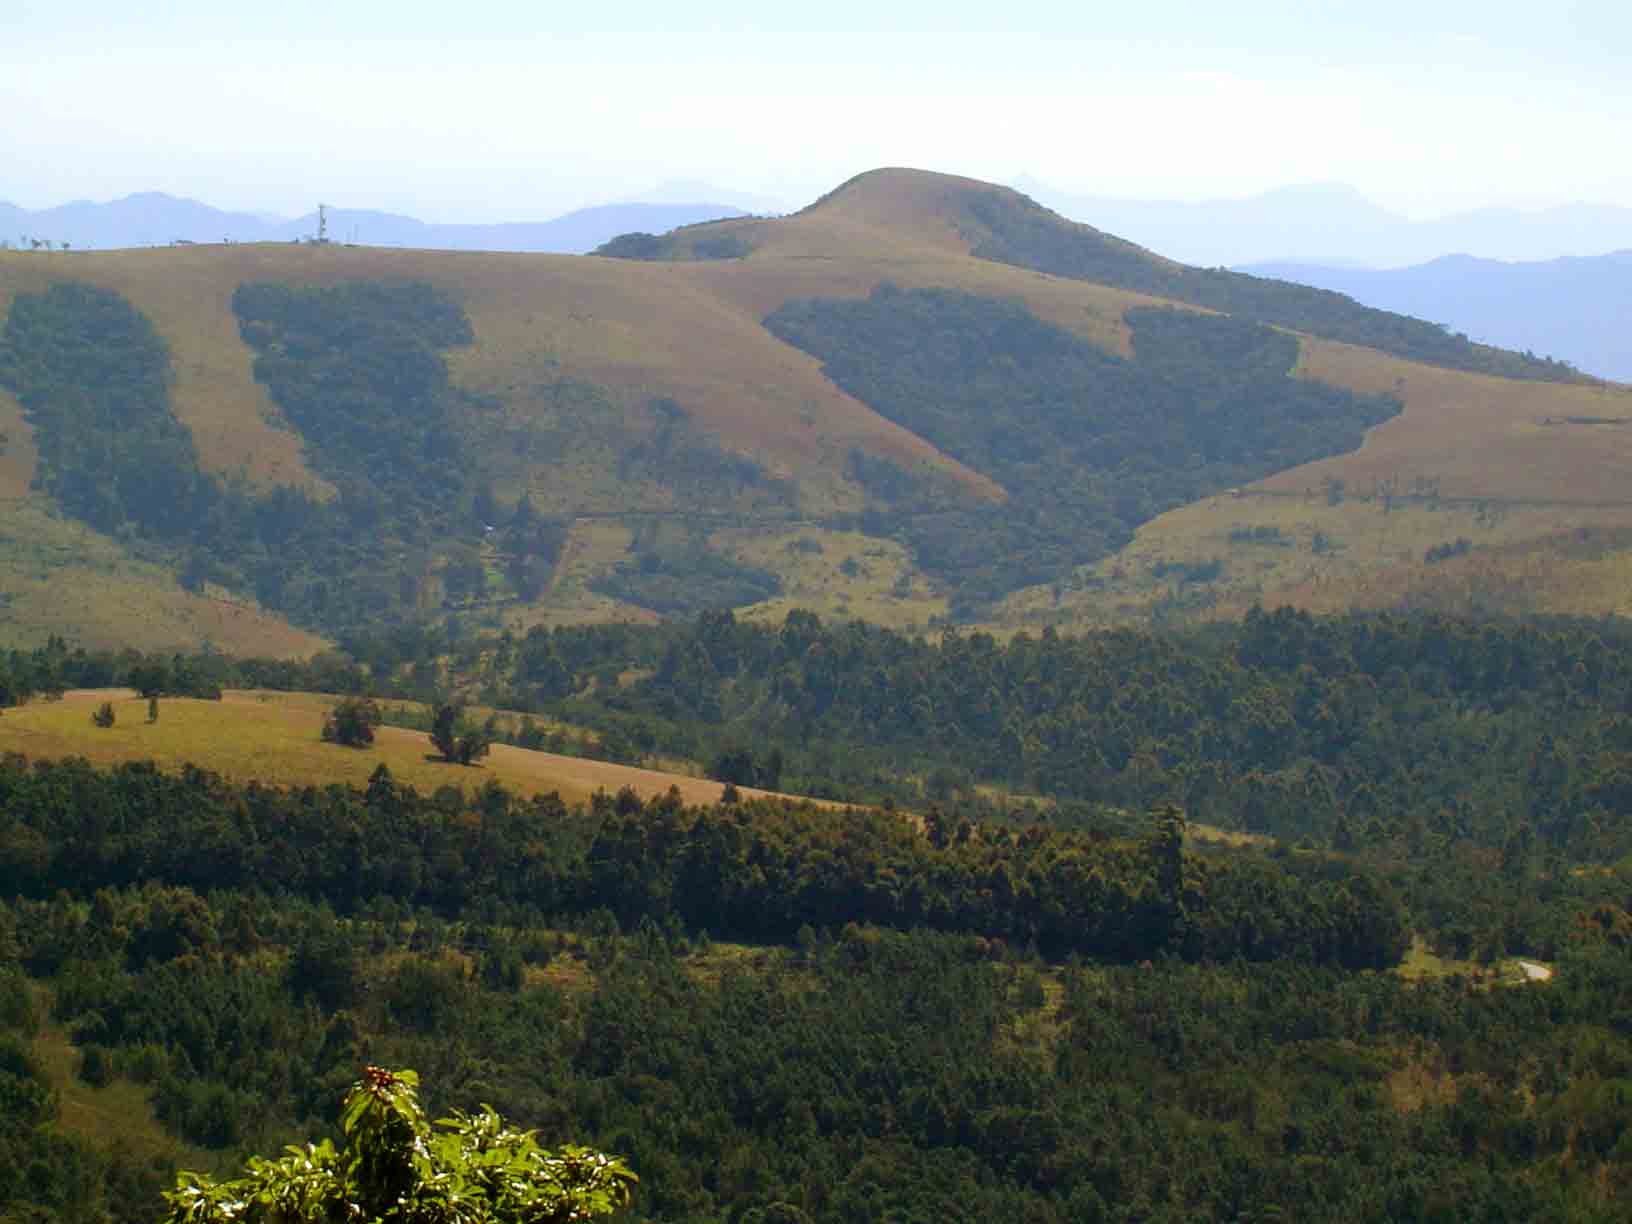 Chinziwa seen from Castle Beacon, showing the patchwork of grassland and forest.